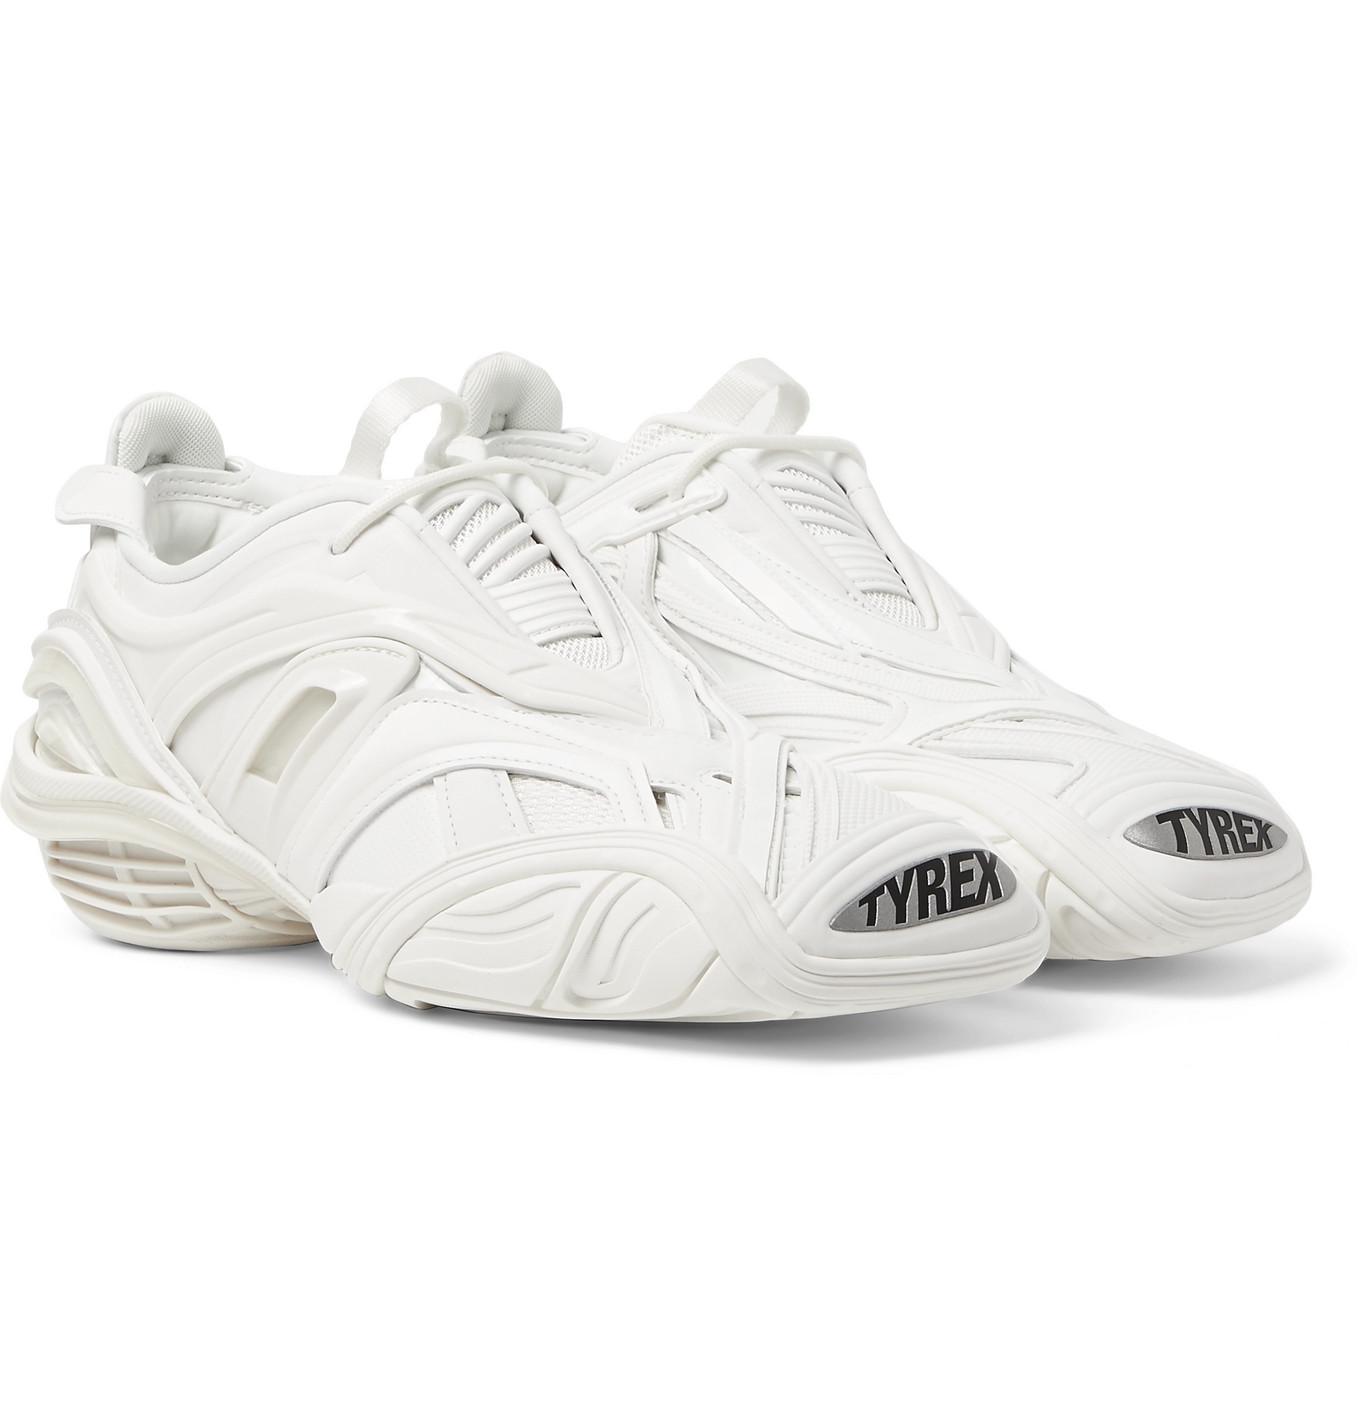 Balenciaga Tyrex Rubber, Mesh And Faux Leather Sneakers in White for ...